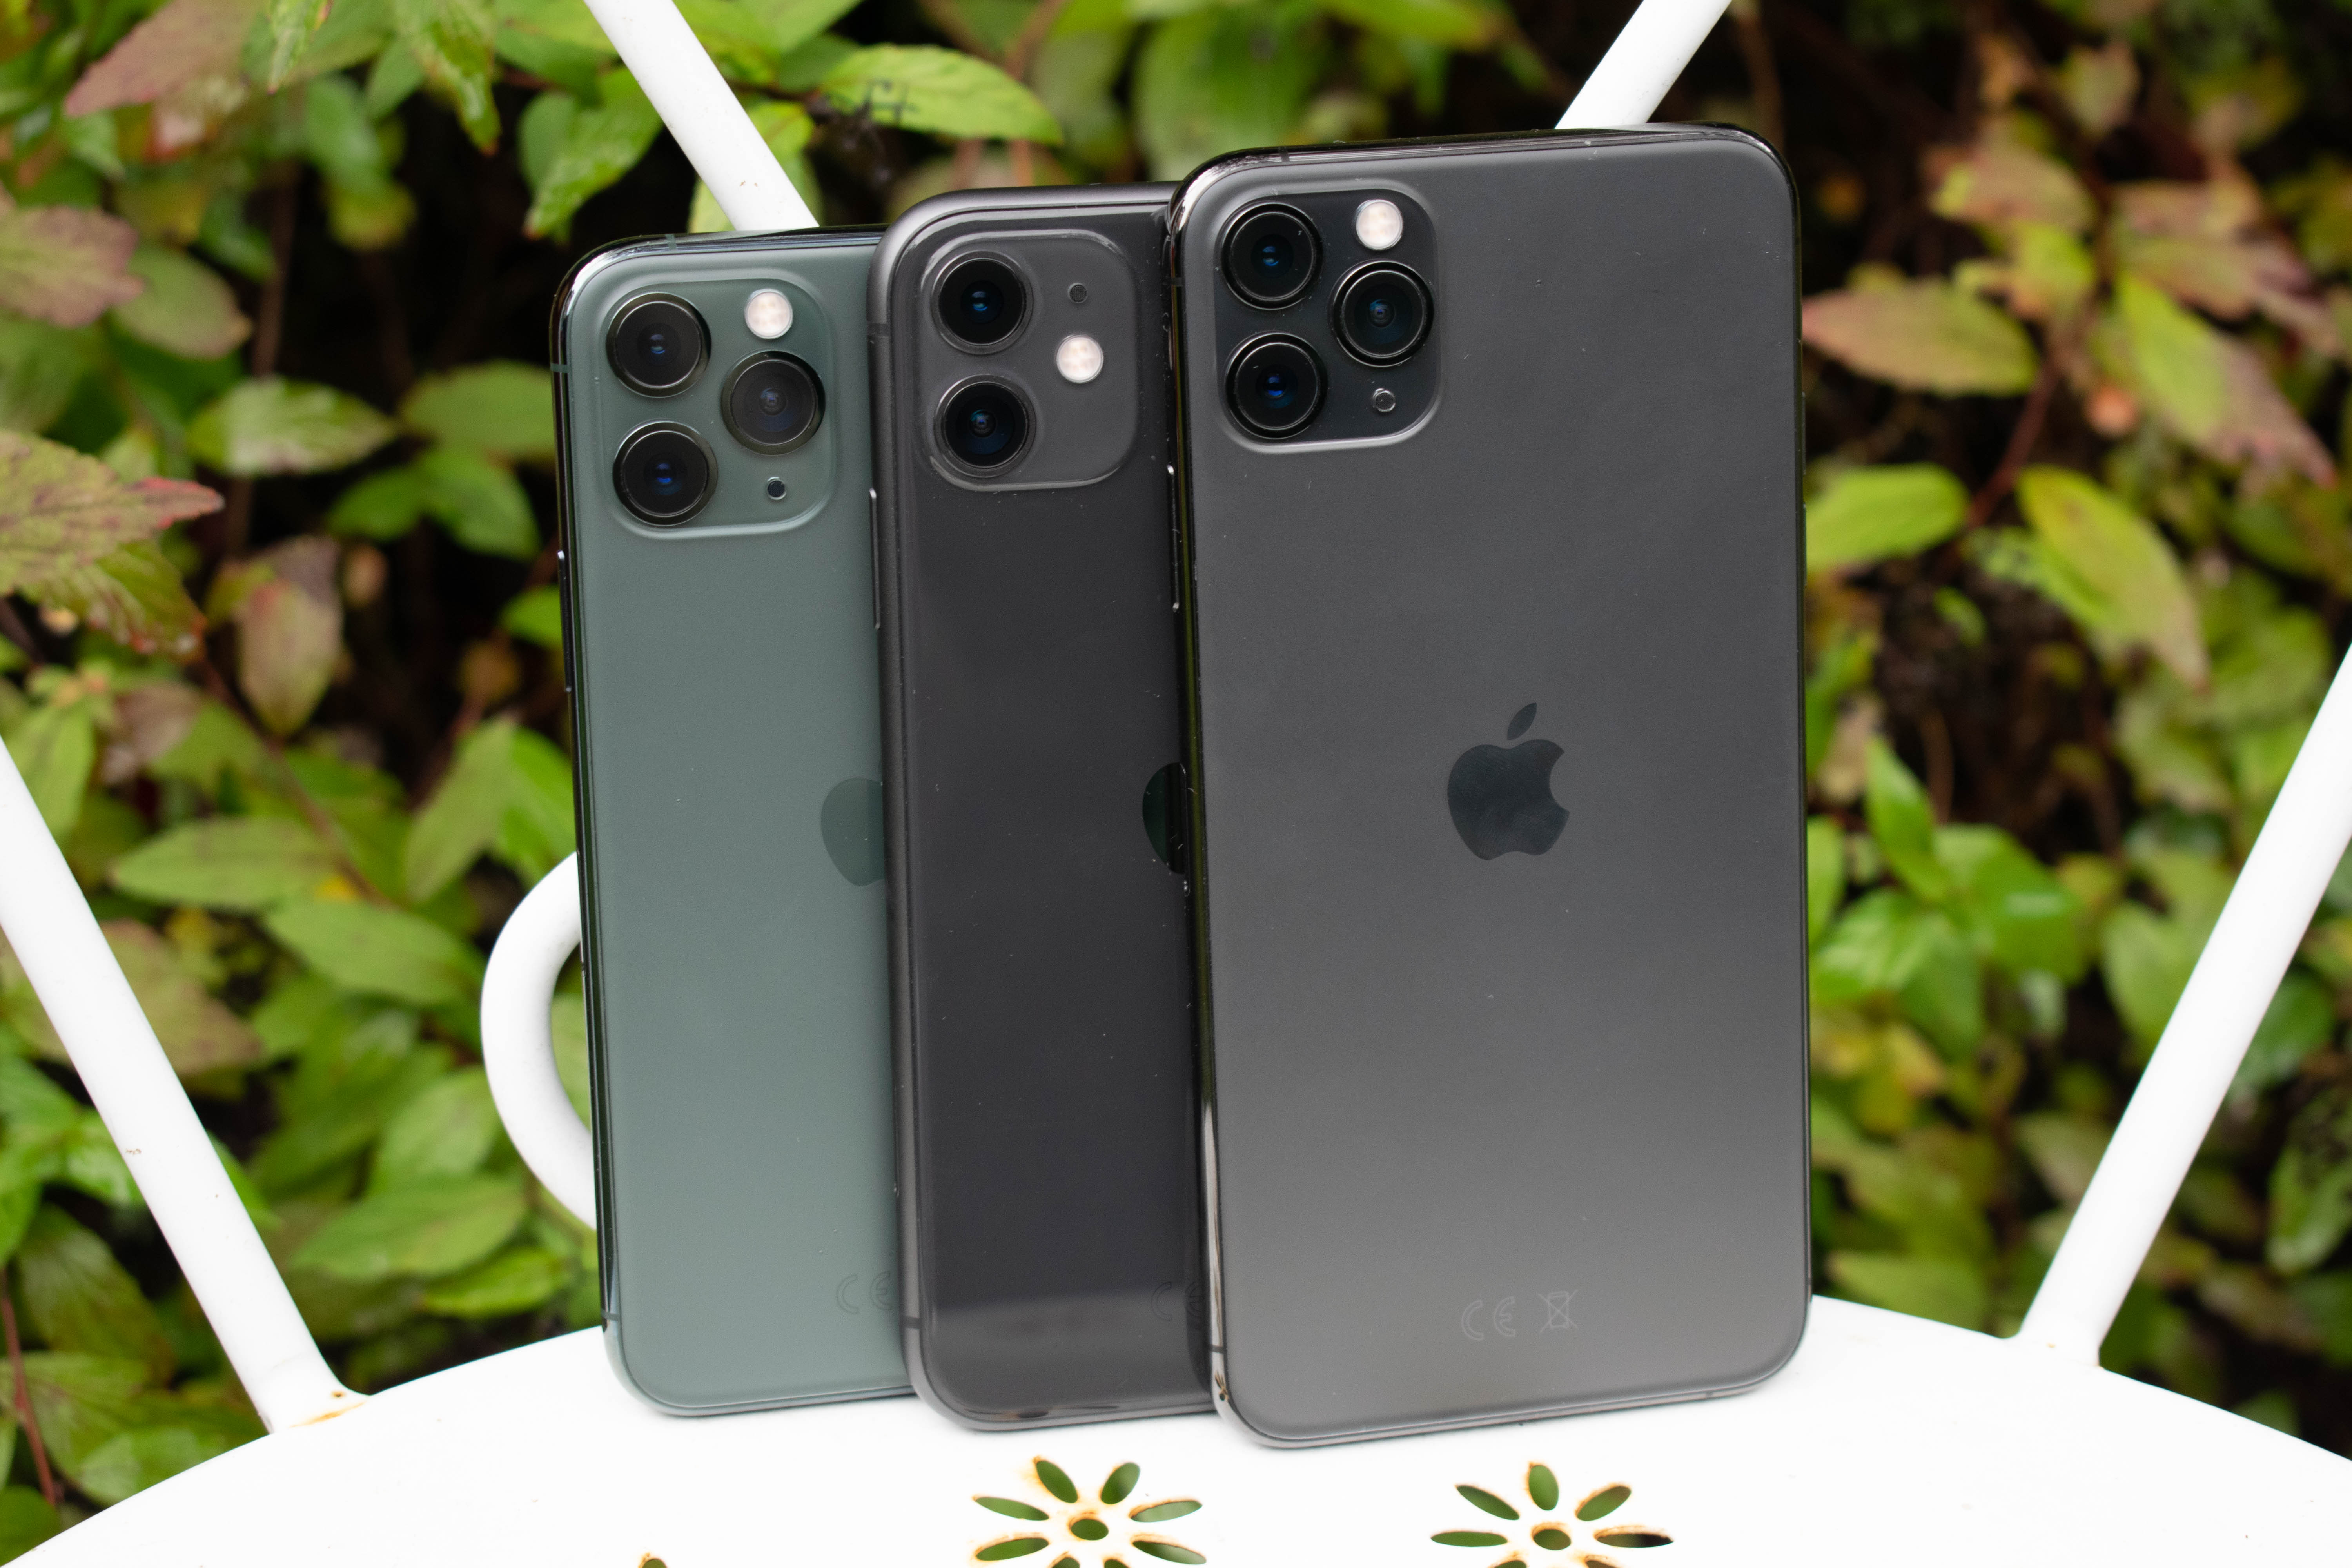 The Apple Iphone 11 11 Pro 11 Pro Max Review Performance Battery Camera Elevated